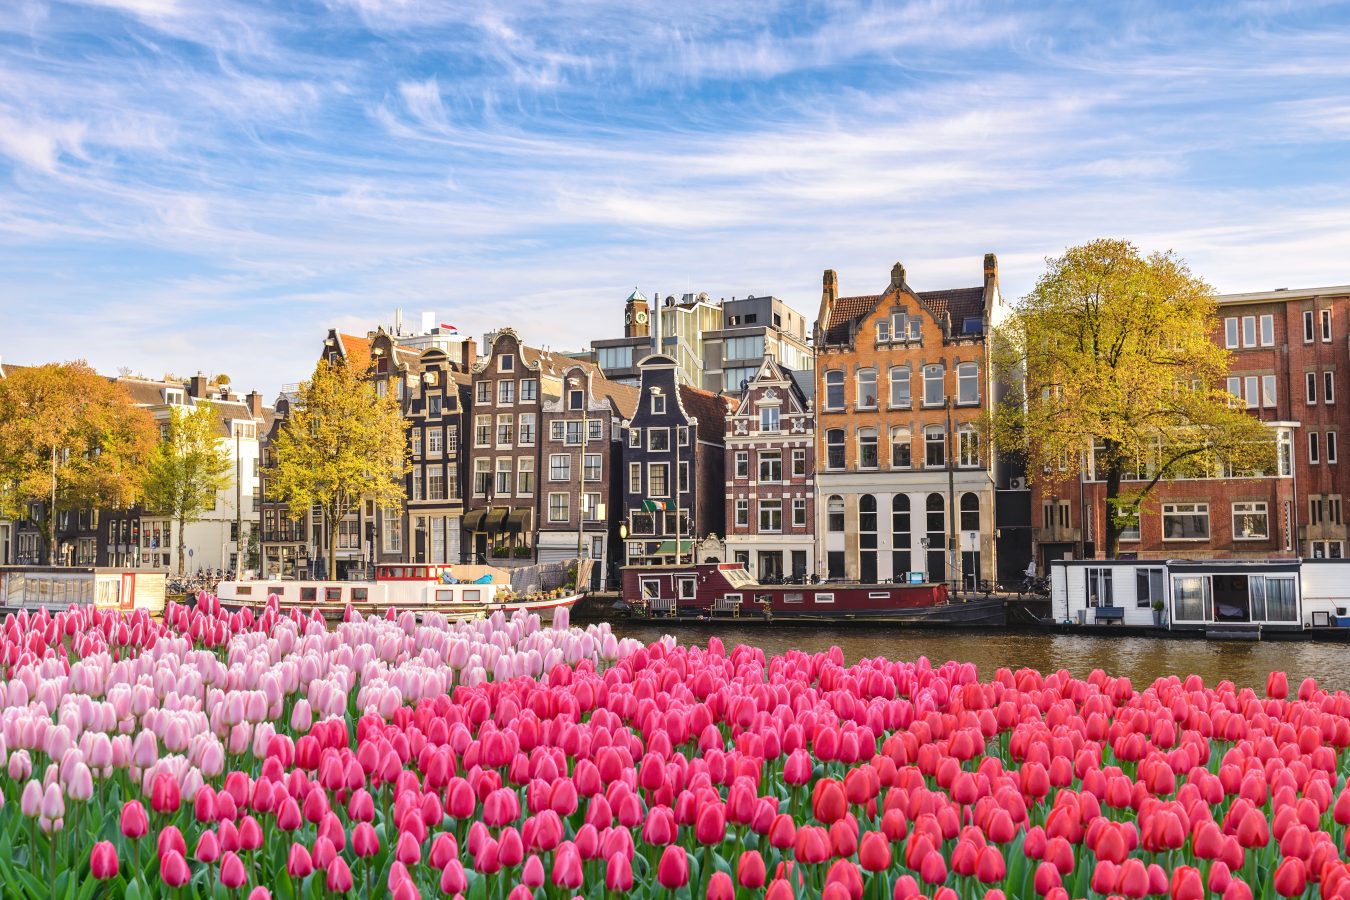 Amsterdam Netherlands on one of the canals with the spring tulips in bloom.